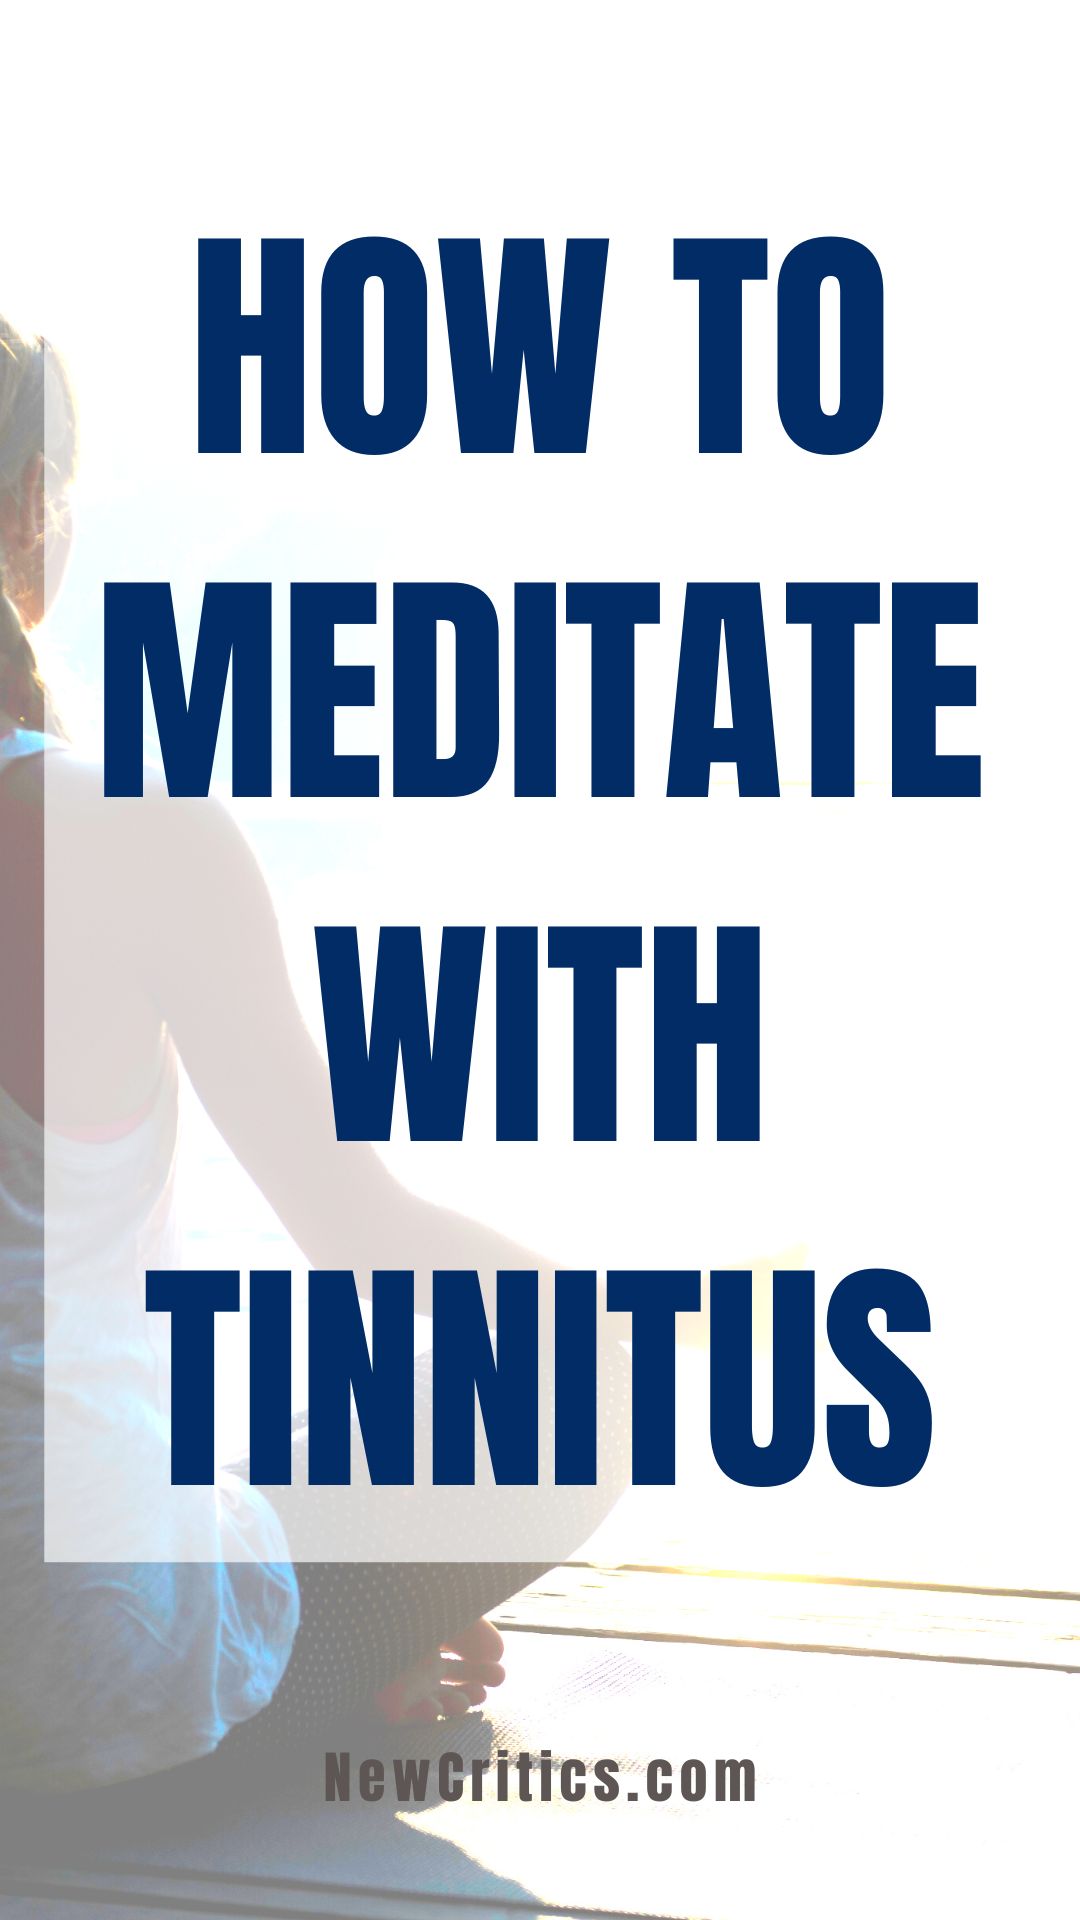 How To Meditate With Tinnitus / Canva